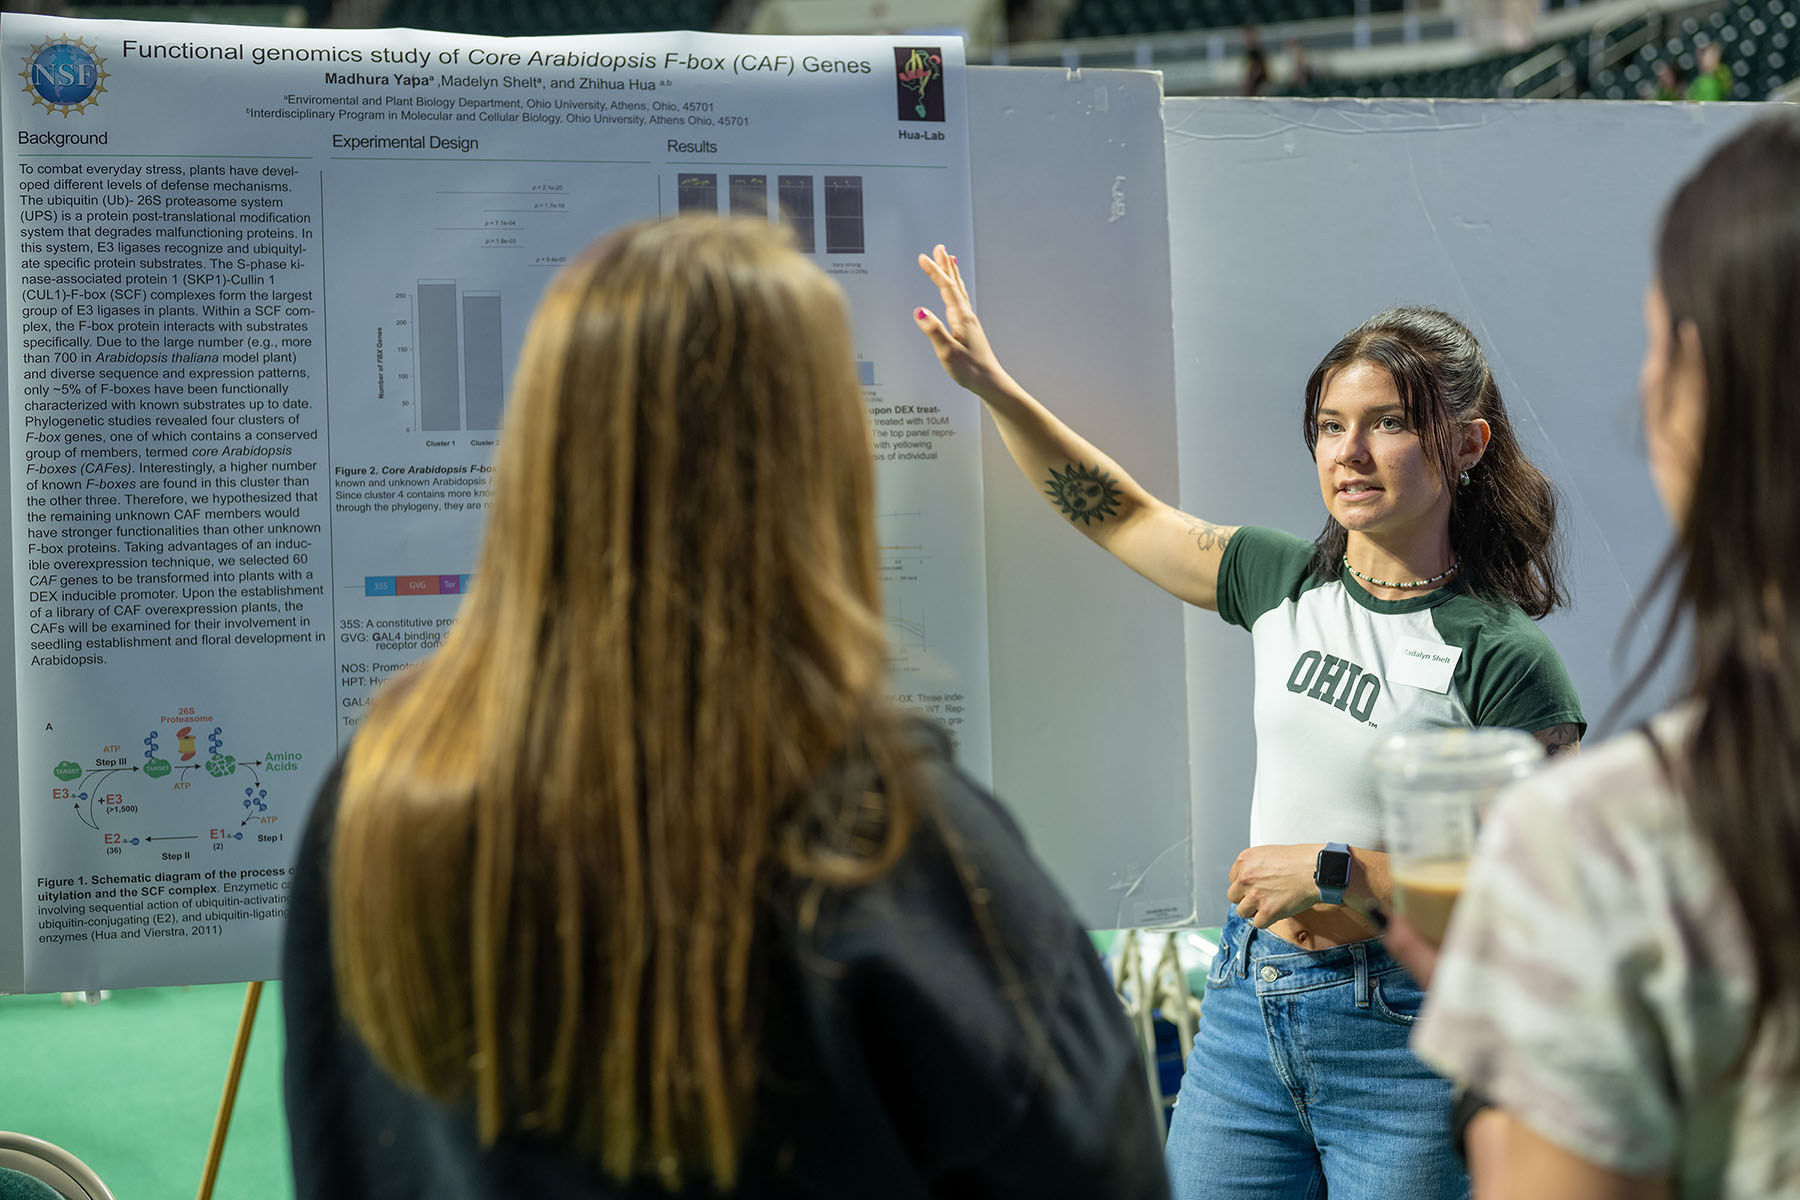 a student points to her research presentation display while two observers look on